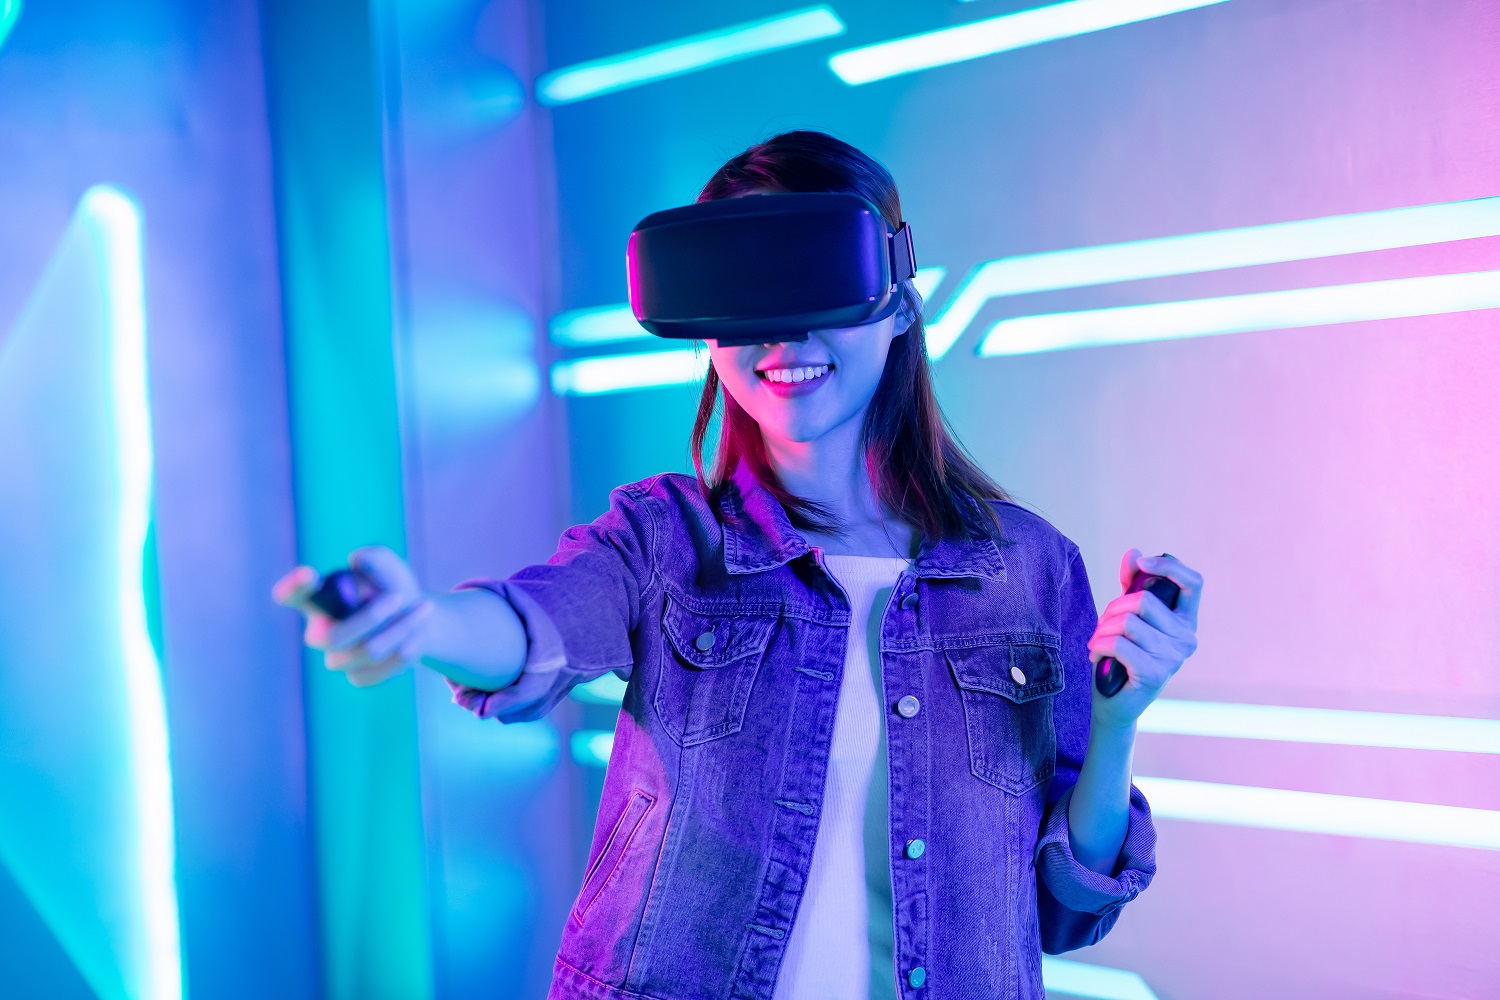 Person wearing VR headset plays a game with nunchucks in hand. They wear a denim jacket and stand in a blue and pink neon-lit room.Person wearing VR headset plays a game with nunchucks in hand. They wear a denim jacket and stand in a blue and pink neon-lit room.Person wearing VR headset plays a game with nunchucks in hand. They wear a denim jacket and stand in a blue and pink neon-lit room.